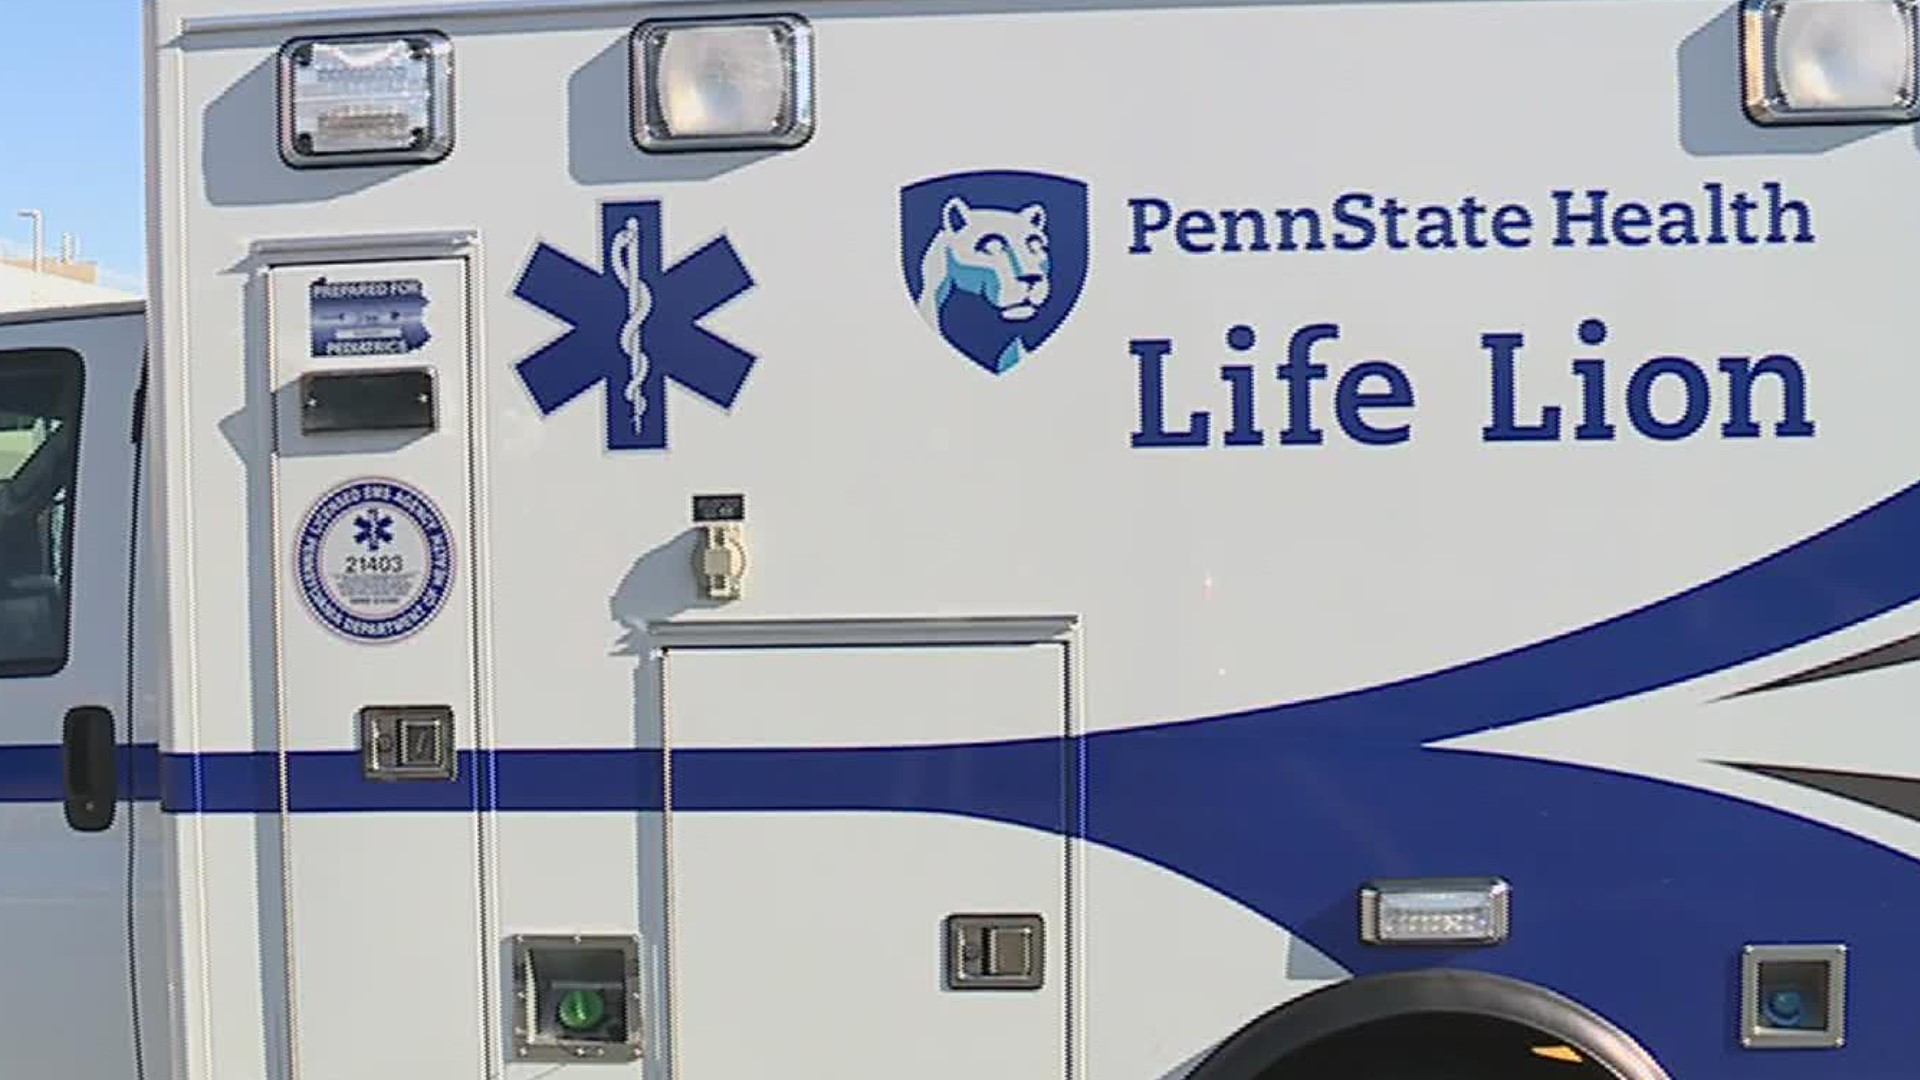 The four-month training program will take place a Penn State Health's EMS facility in Mount Joy, Lancaster County.